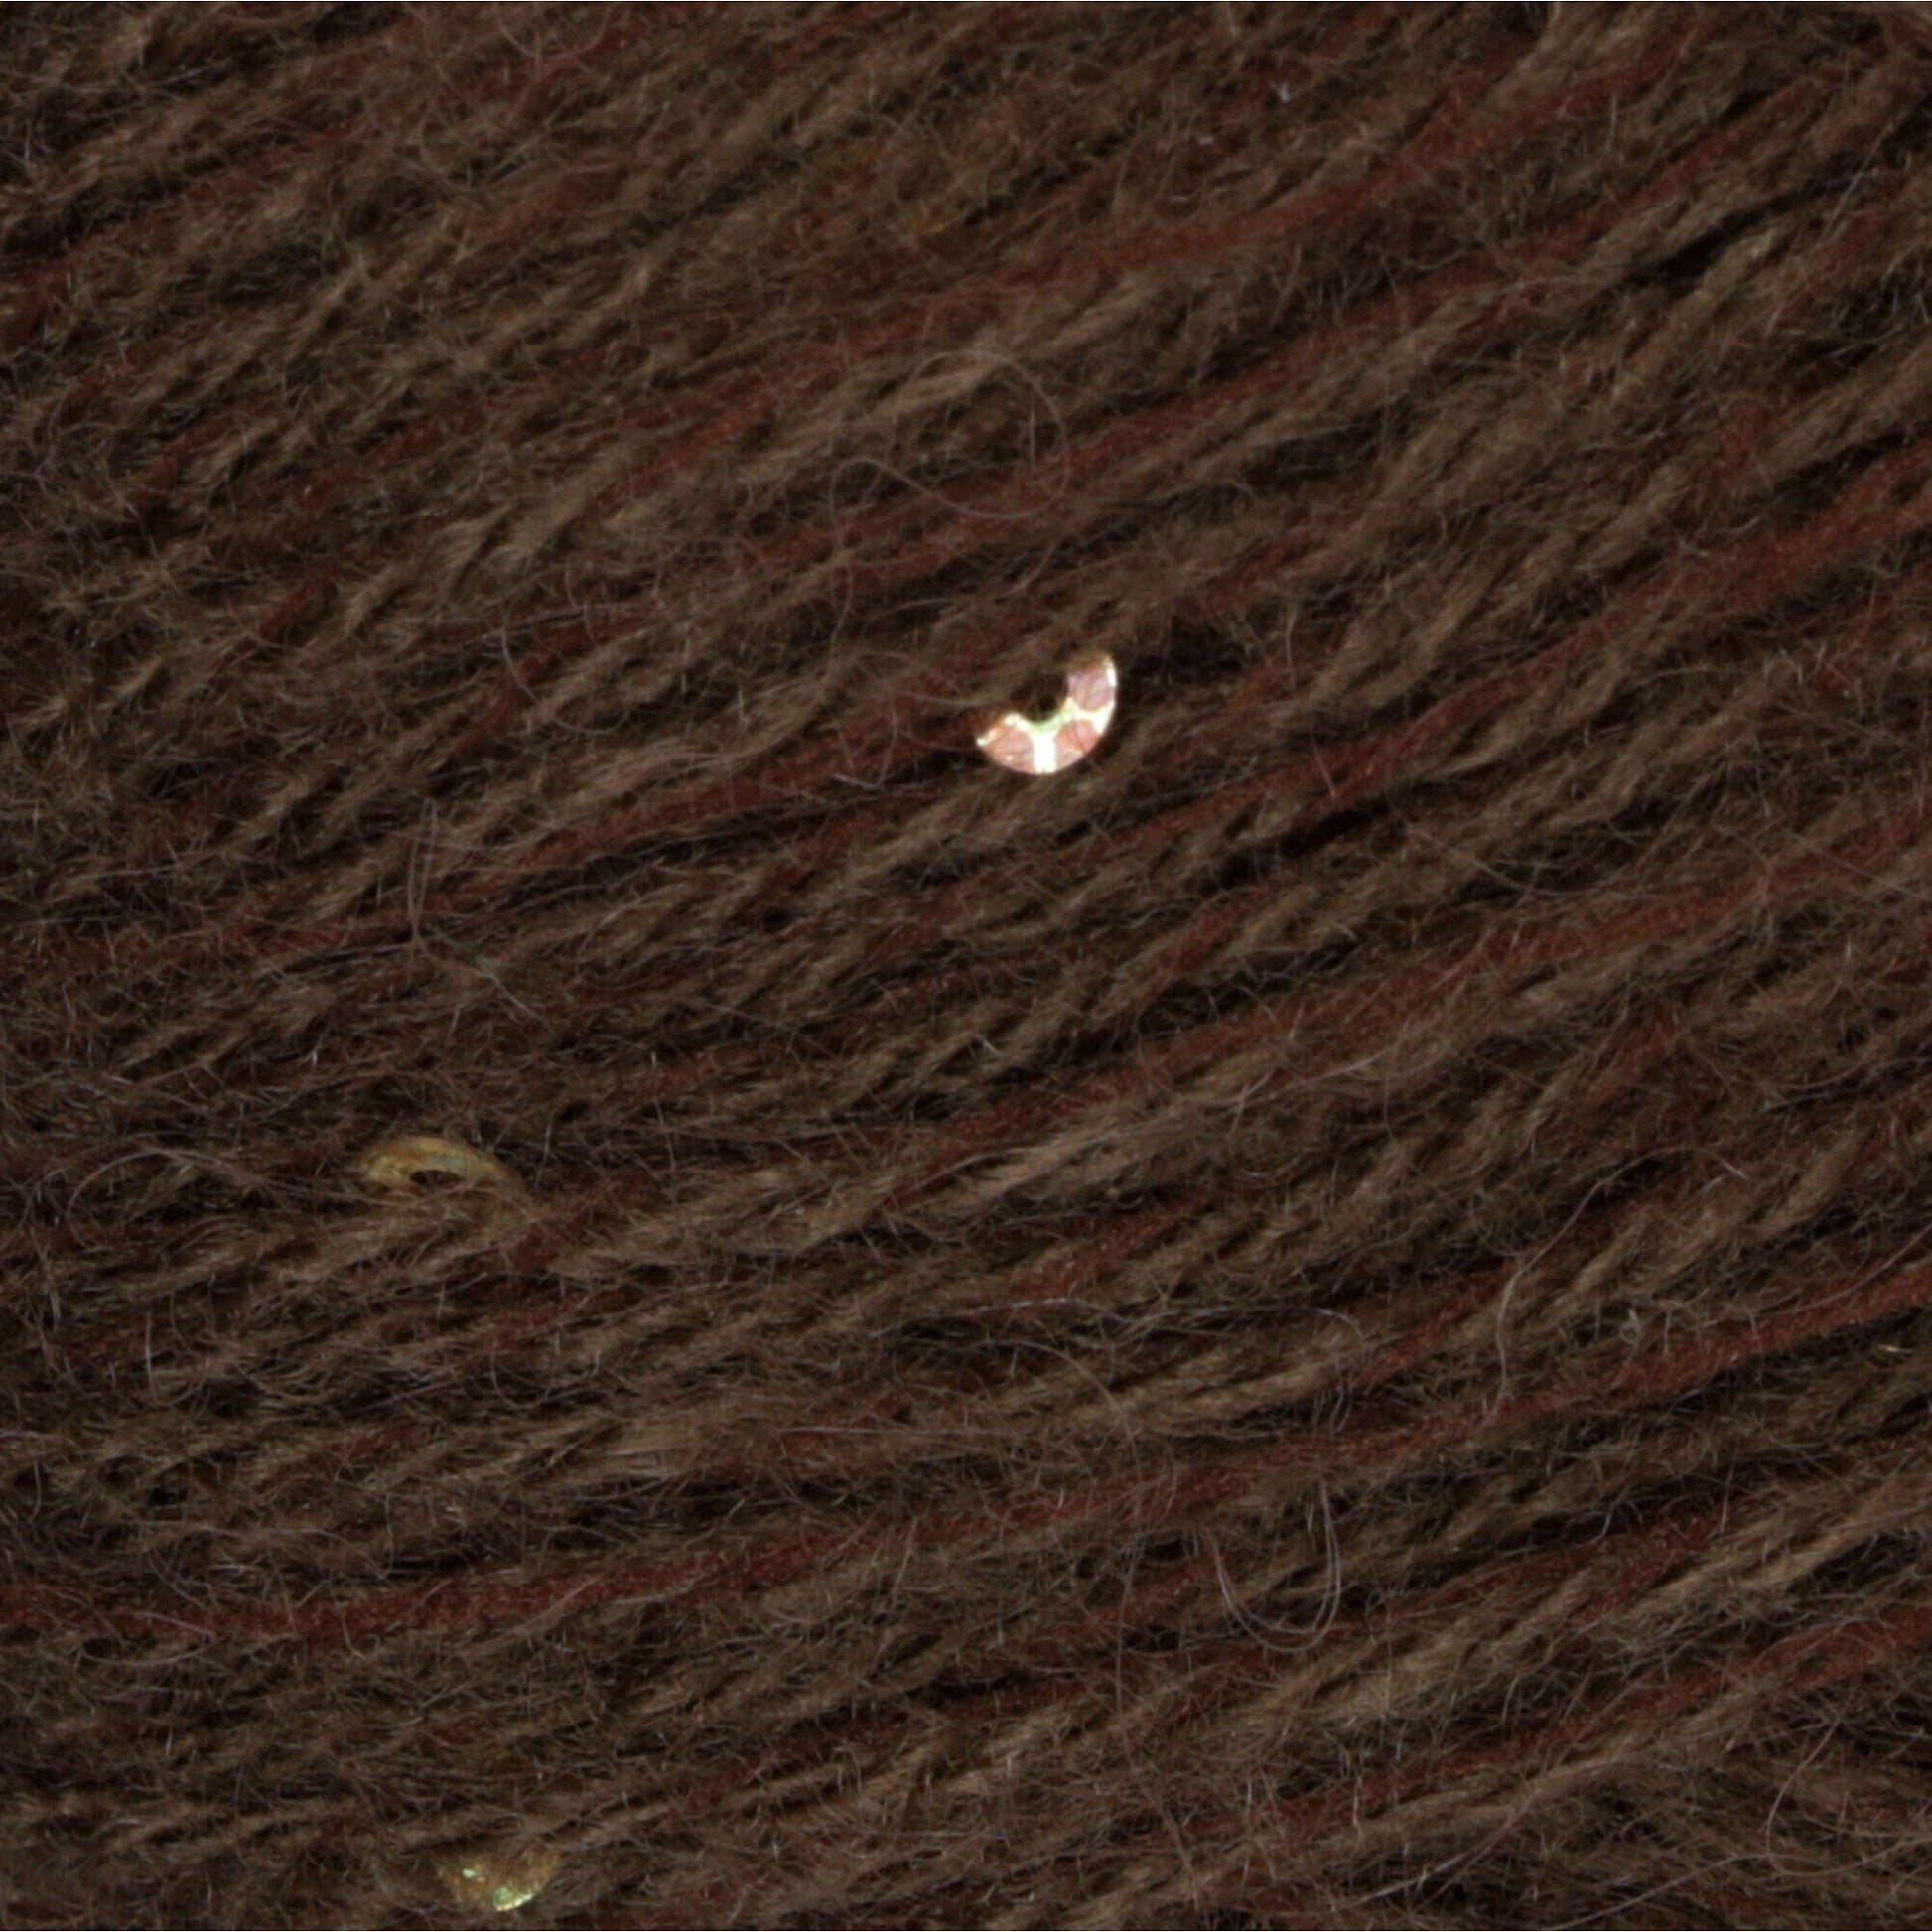 Patons Lace Sequin Yarn - Discontinued Chocolate Diamond